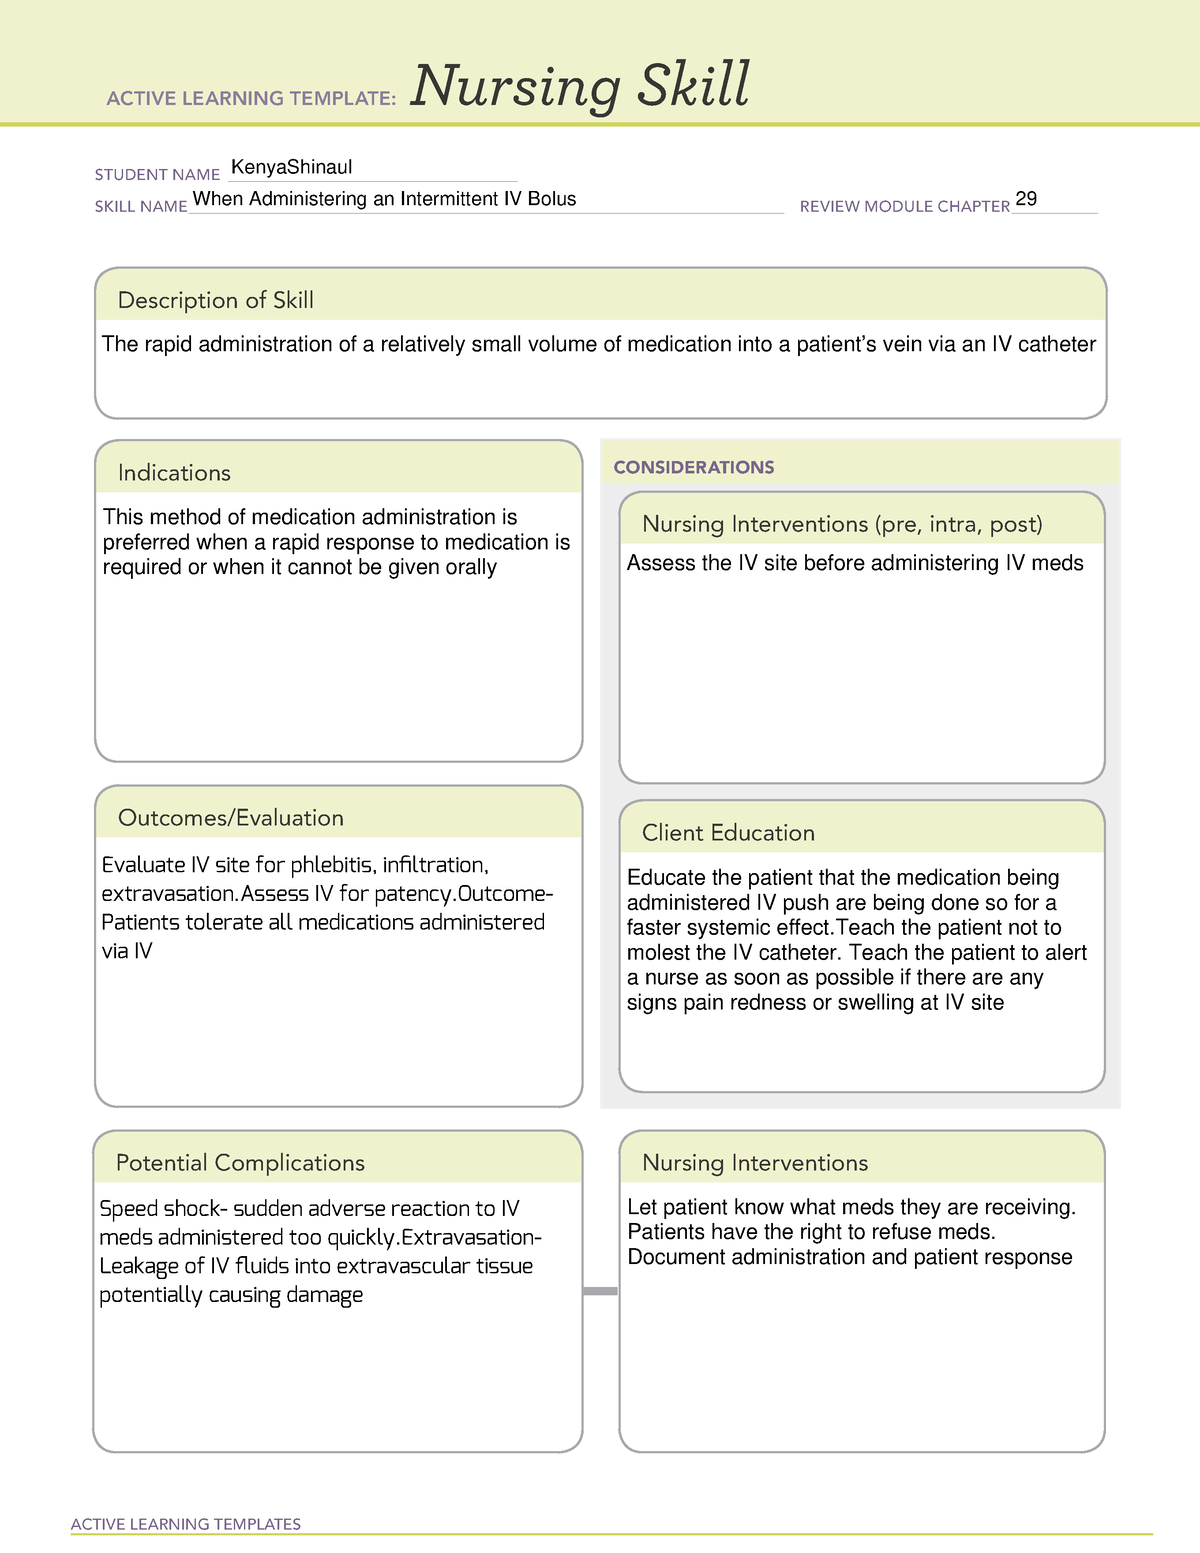 ATI nursing pharmacology review 2022 - ACTIVE LEARNING TEMPLATES ...